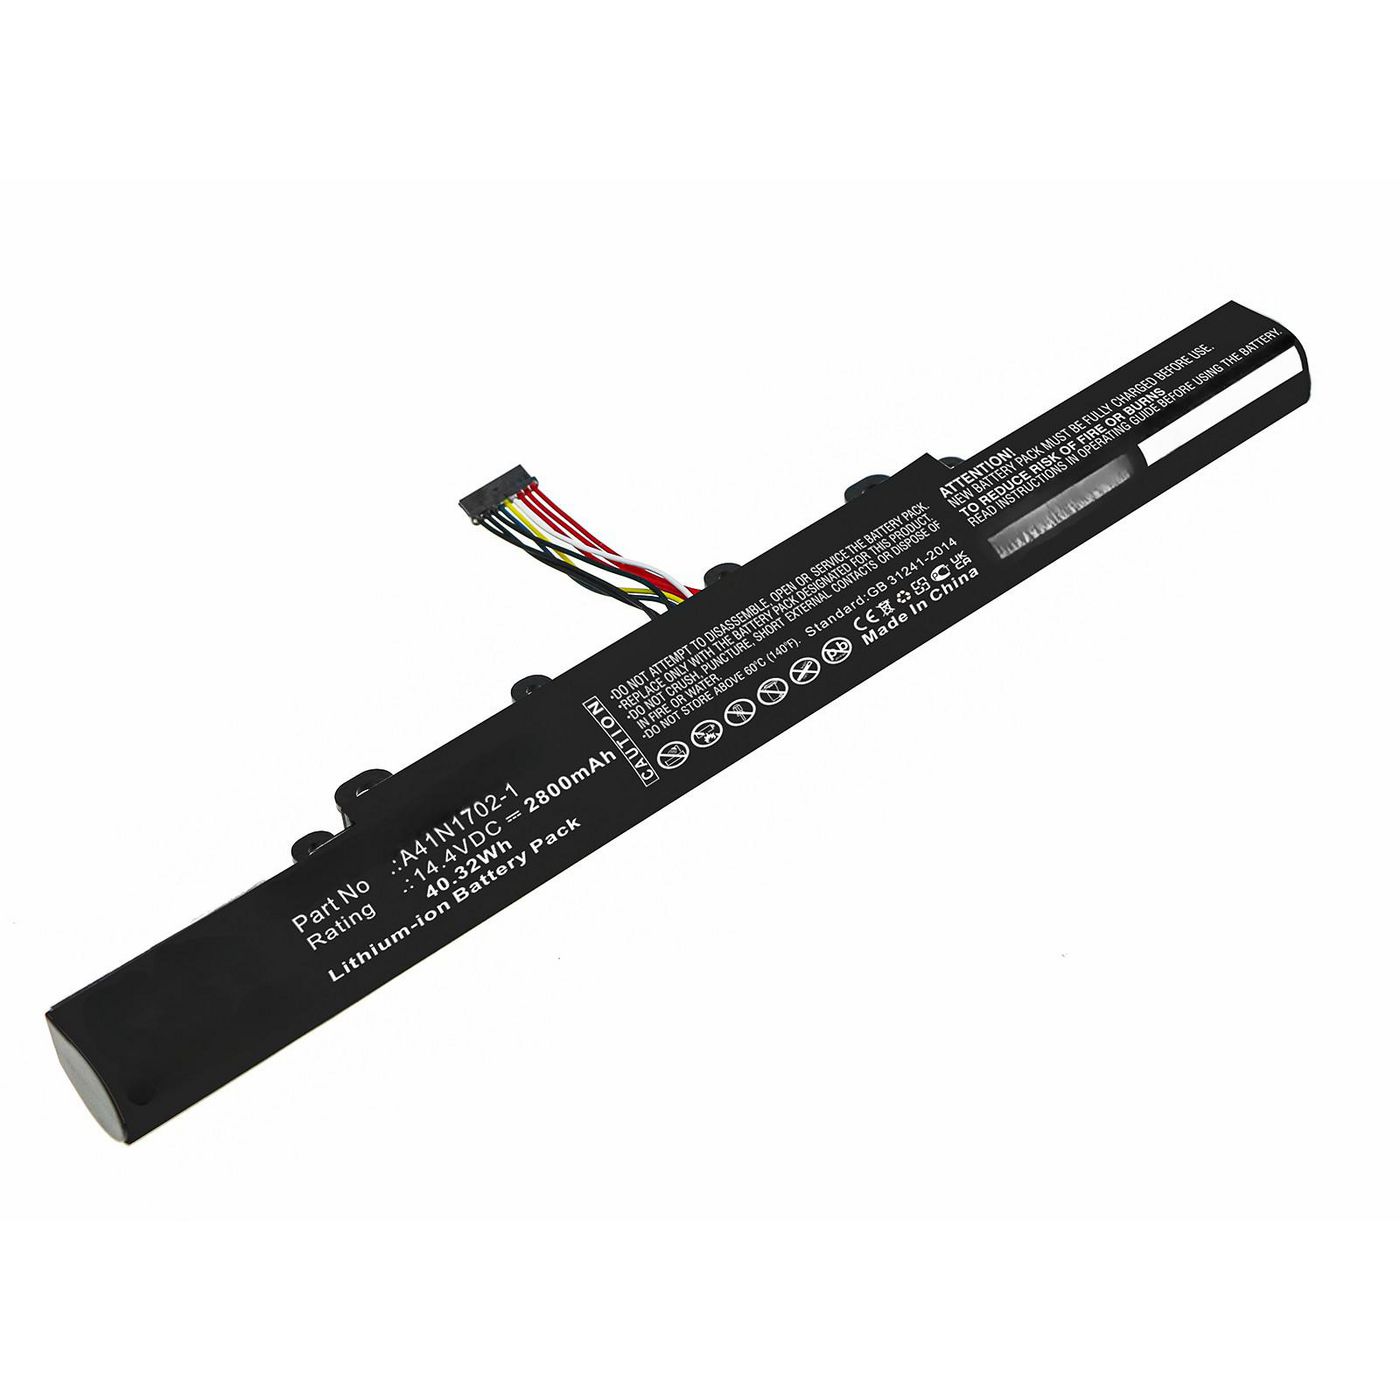 CoreParts MBXAS-BA0226 W125993352 Laptop Battery for Asus 